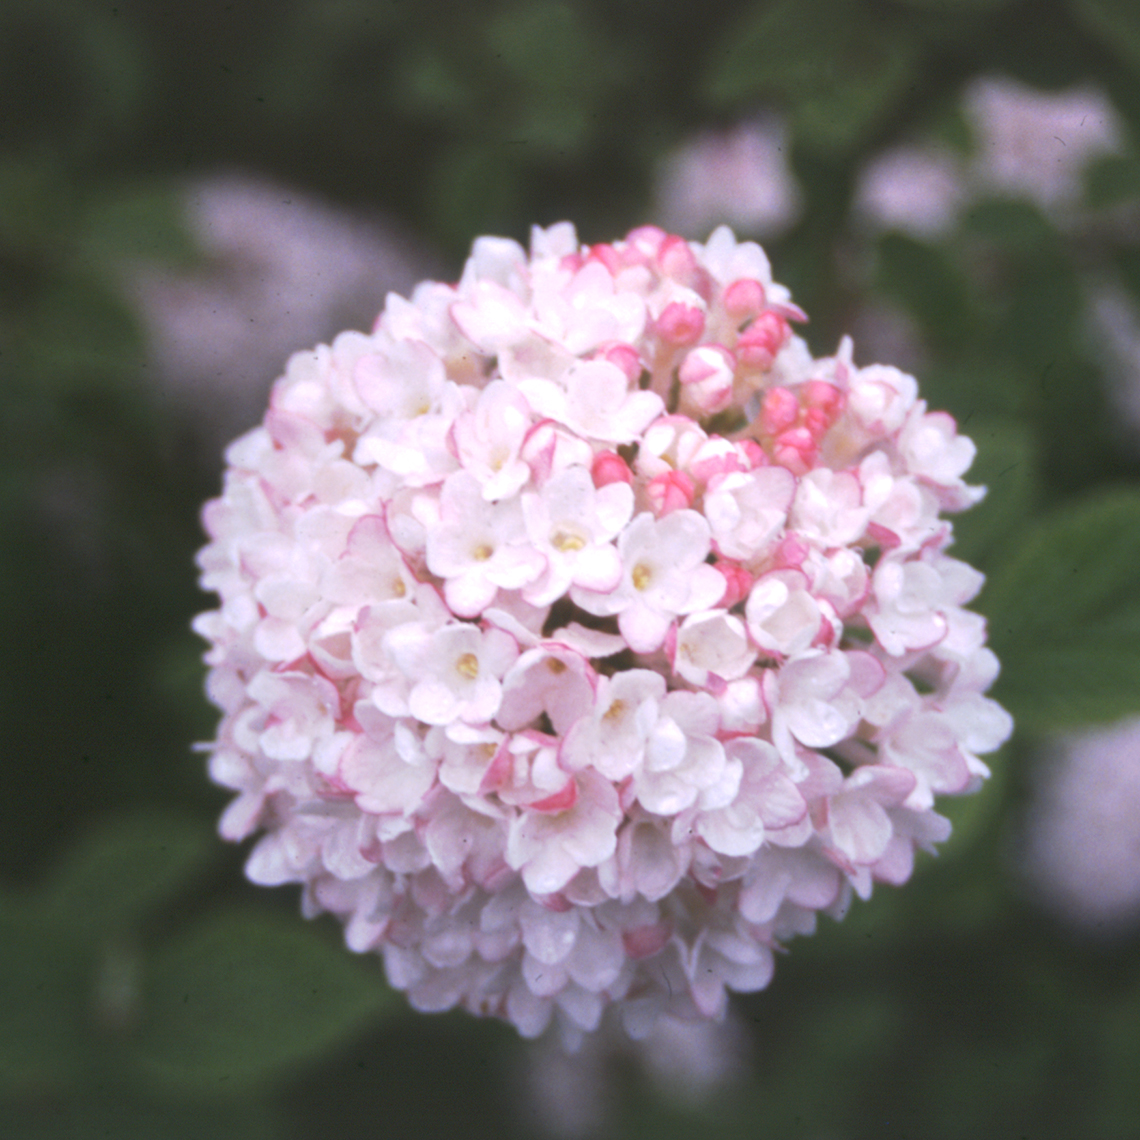 Pink and white flower cluster of Diana Koreanspice viburnum